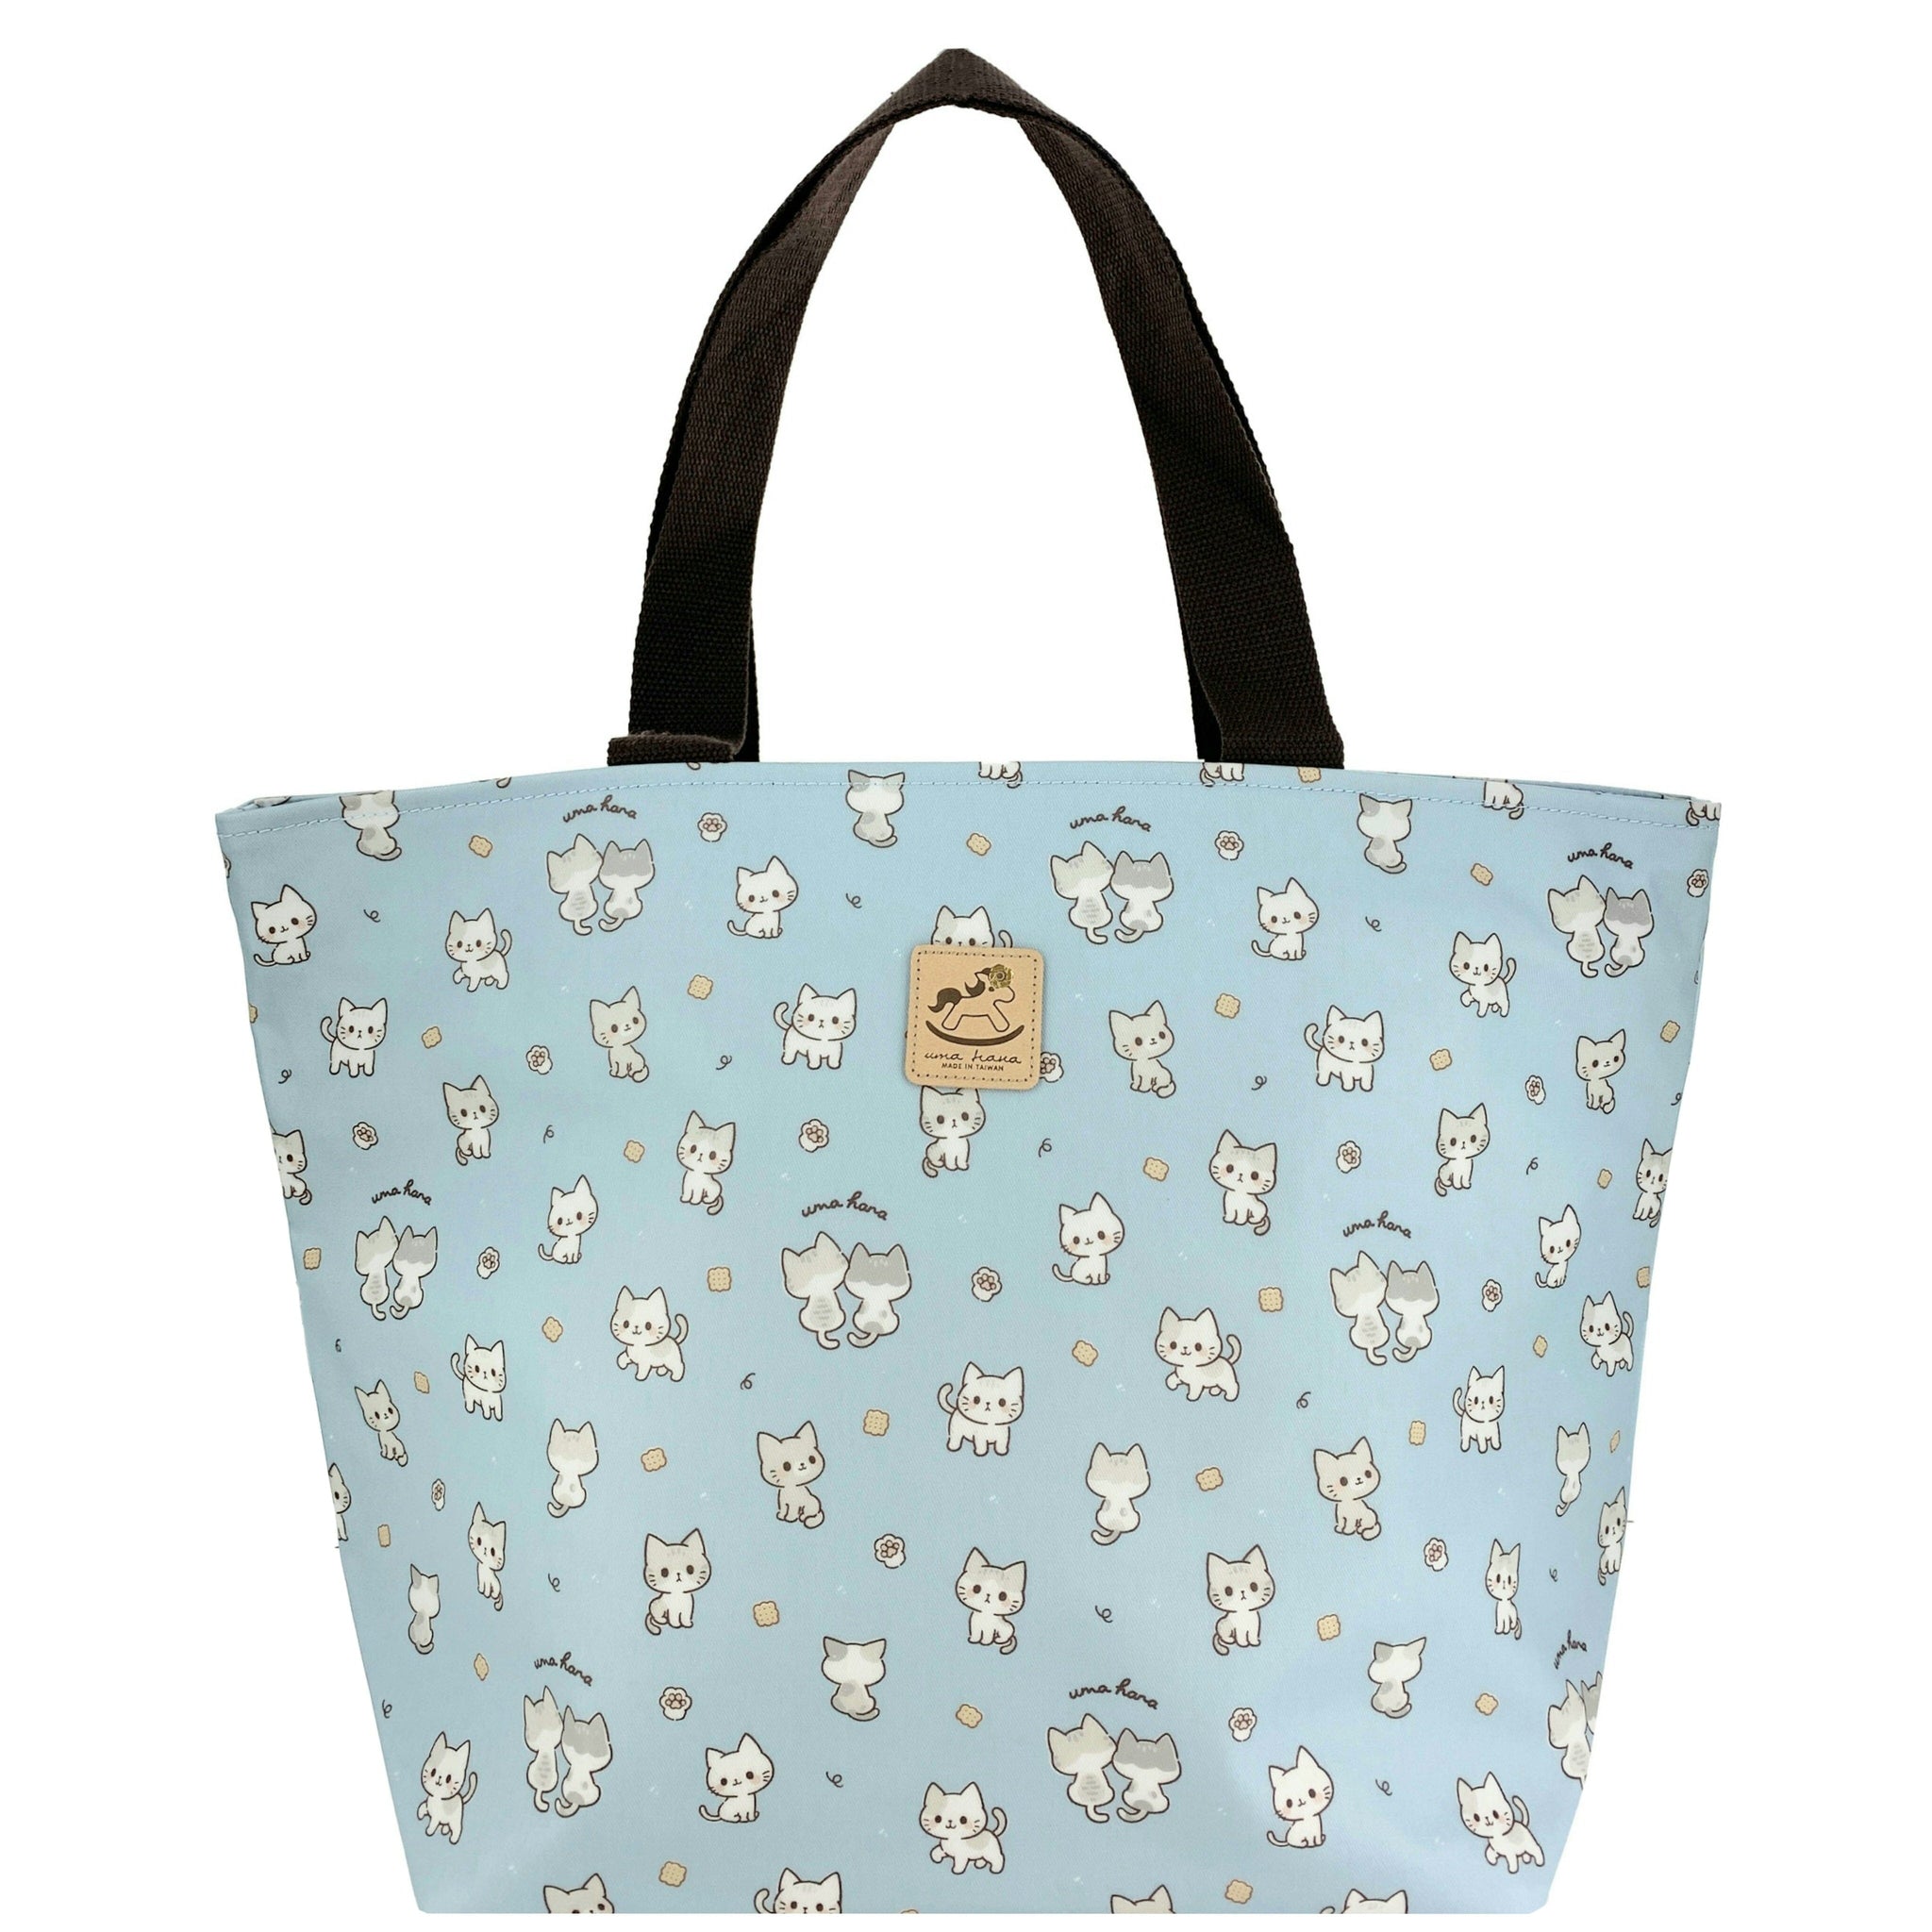 Baby Blue Crumbs & Kittens Large Travel Tote Tote Tworgis 